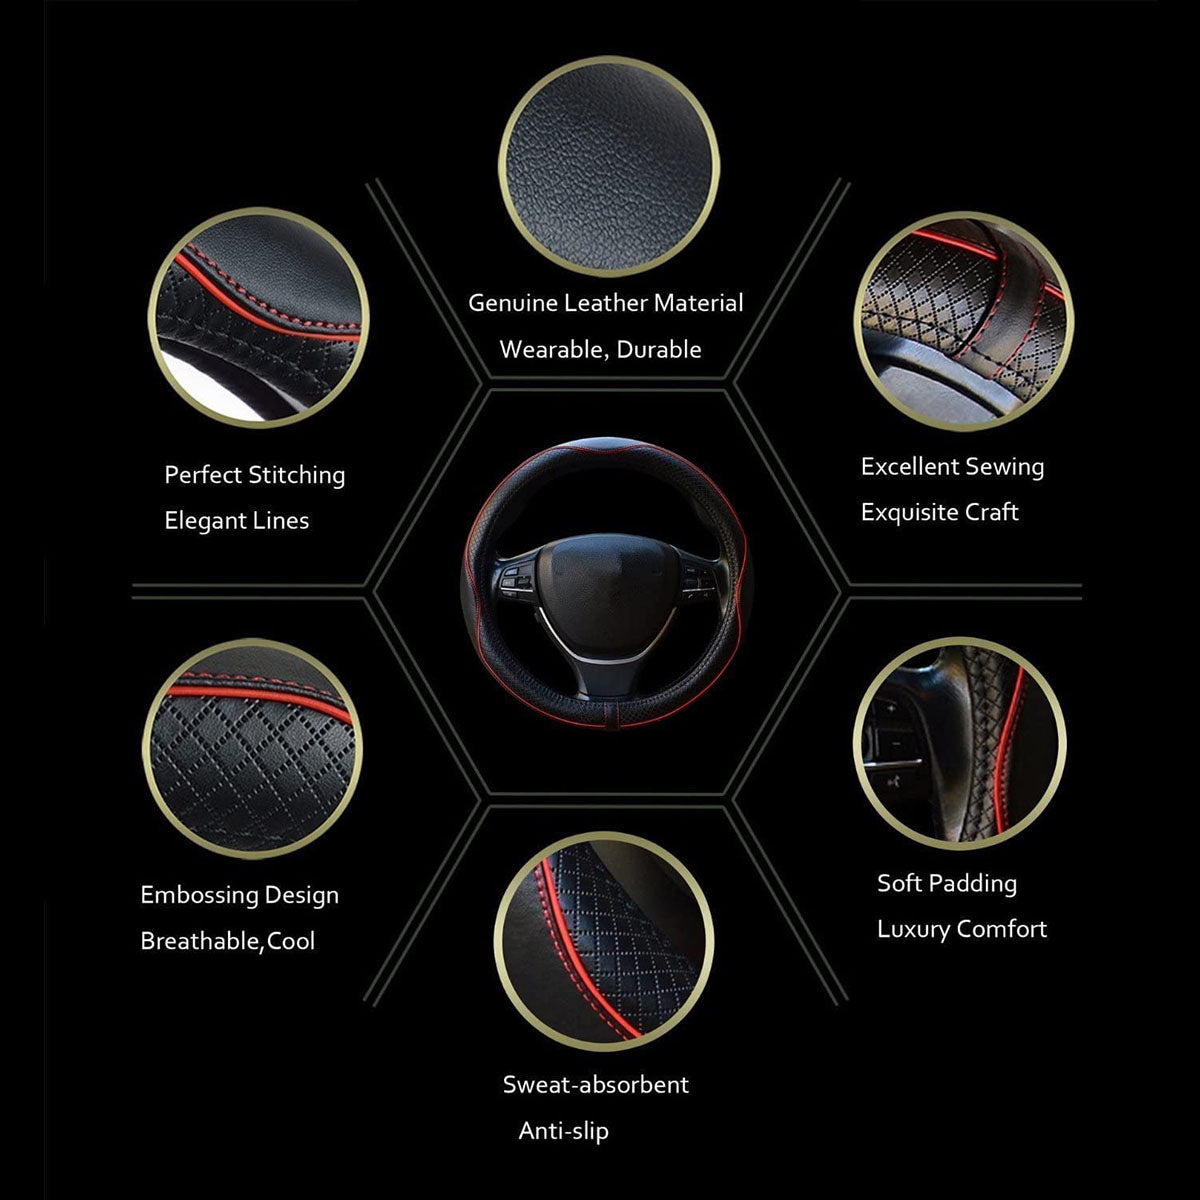 Car Steering Wheel Cover, Custom For Your Cars, Anti-Slip, Safety, Soft, Breathable, Heavy Duty, Thick, Full Surround, Sports Style, Car Accessories PF18990